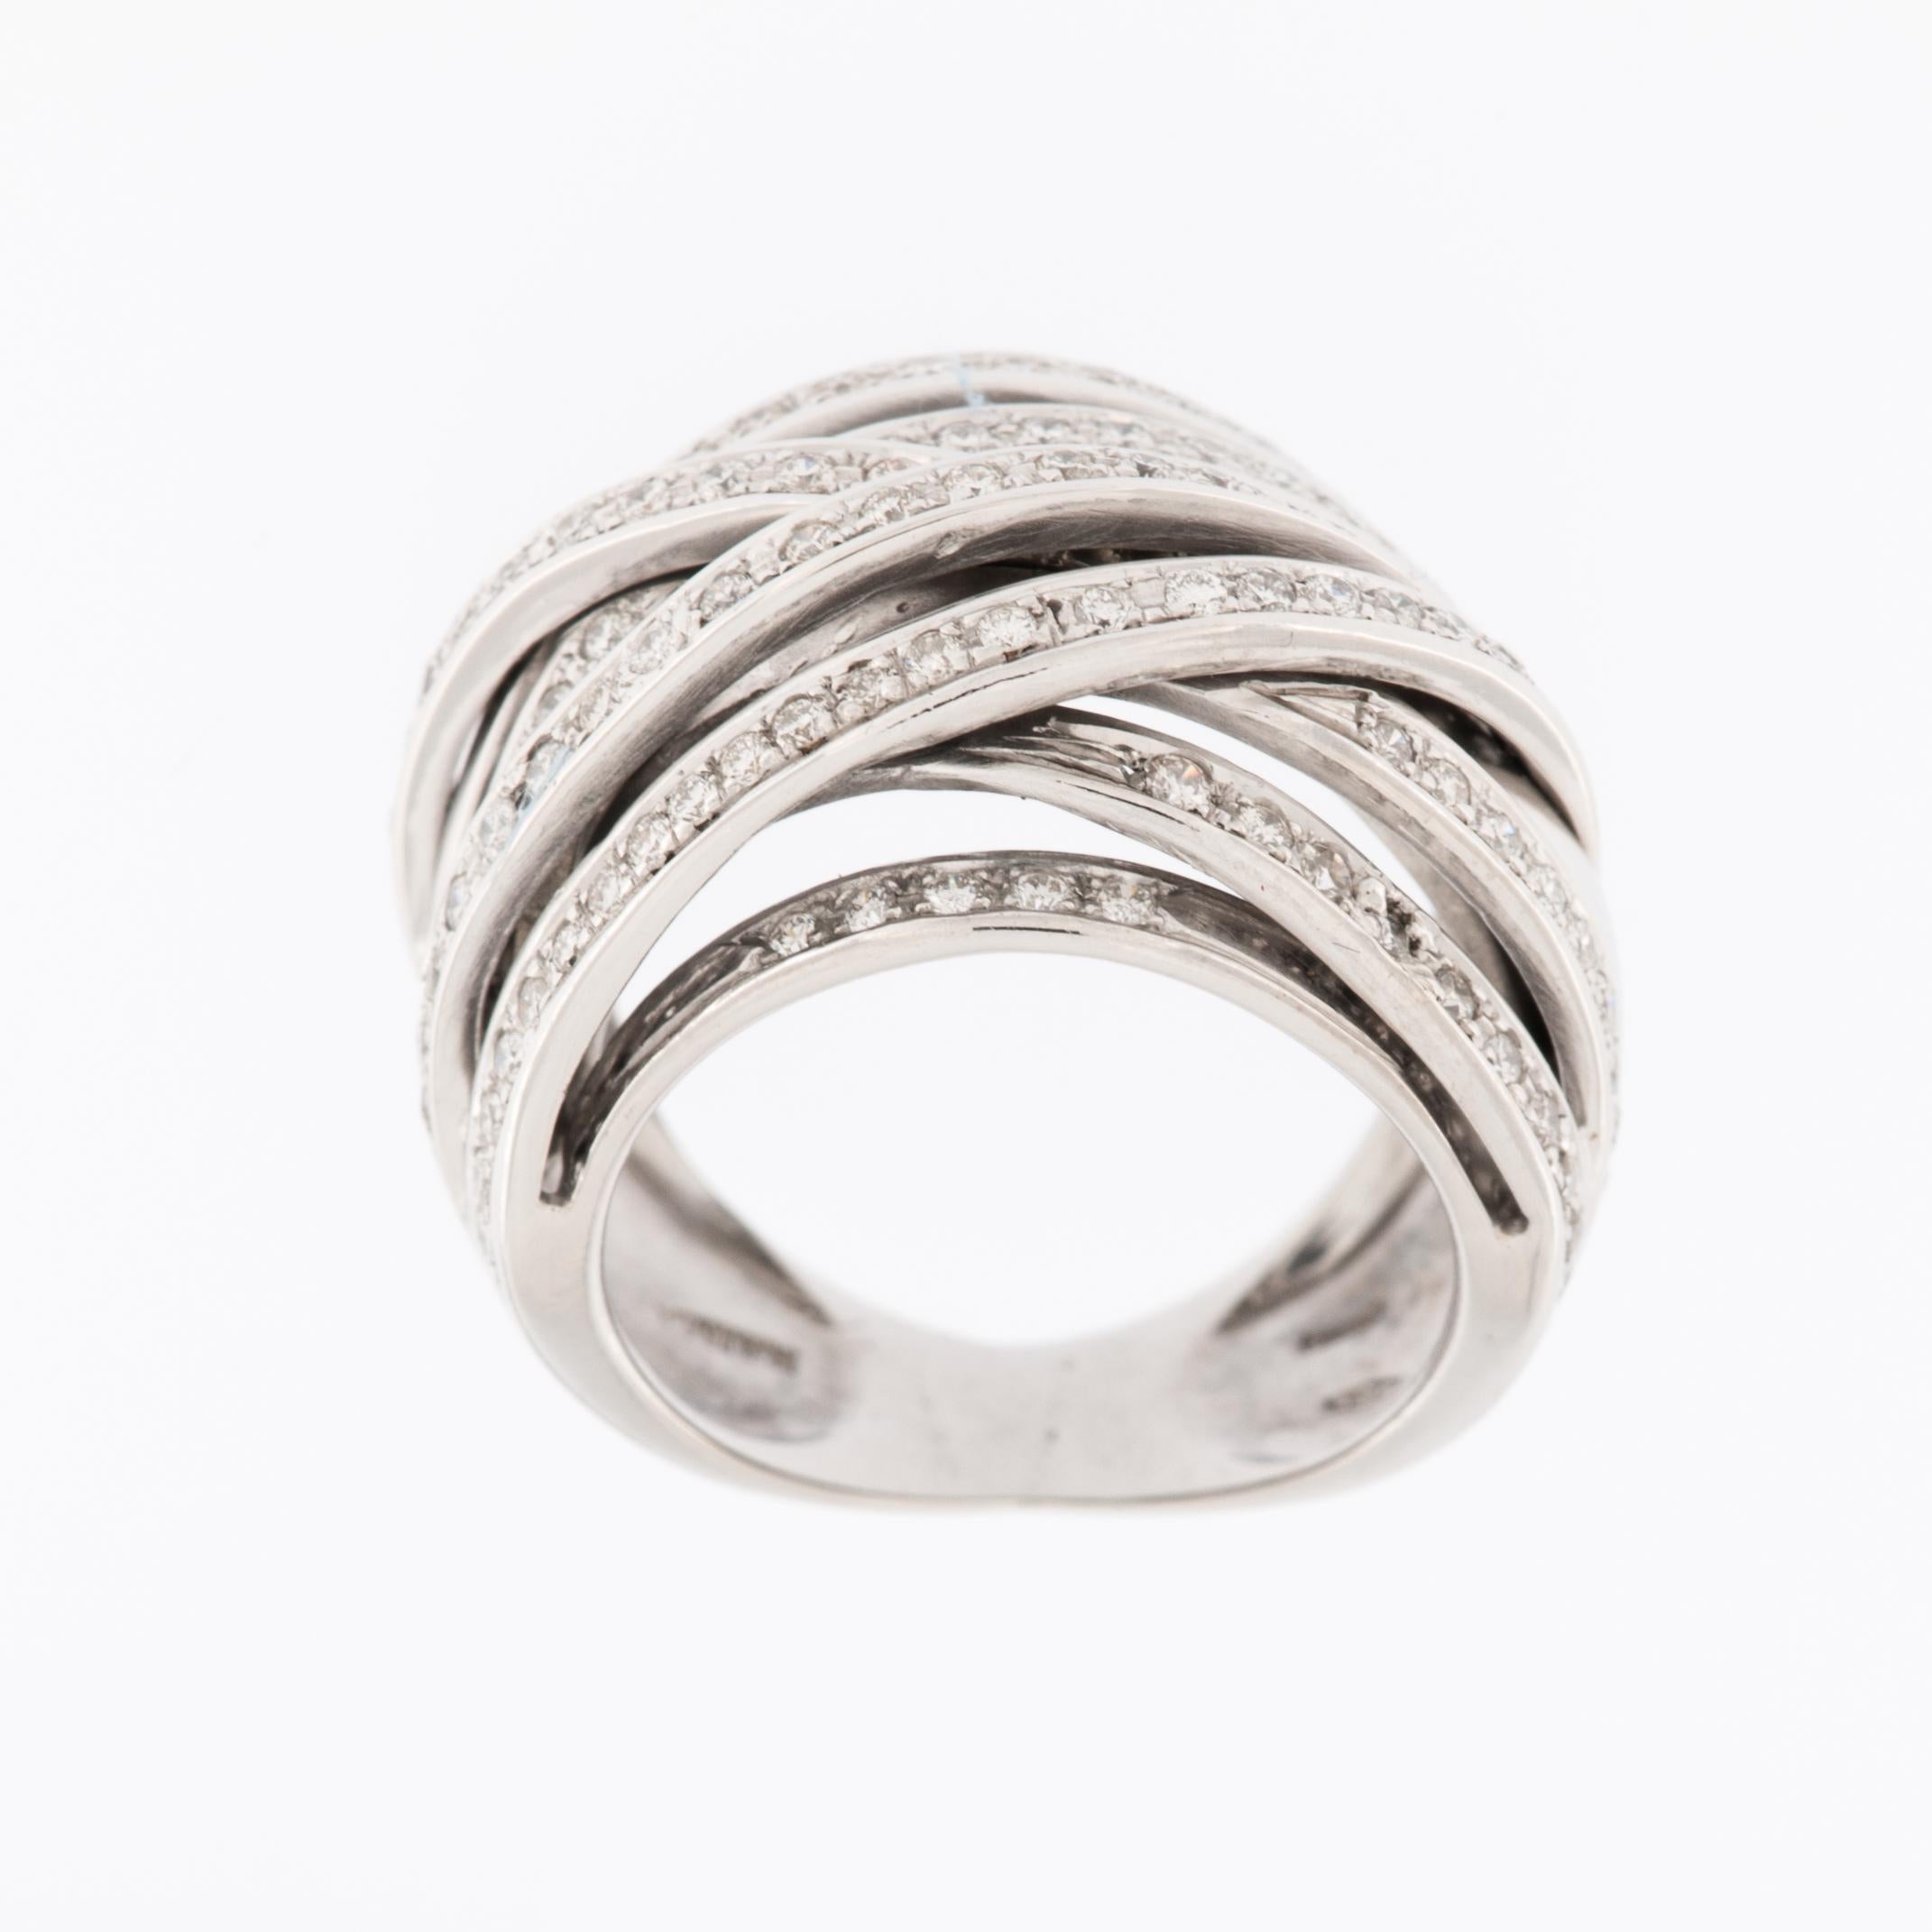 The 18kt White Gold Italian Ring with Diamonds is a luxurious and exquisite piece of jewelry that exemplifies elegance and sophistication. Crafted by RAIMA Gioielli Valenza - Italy, from 18 karat white gold, this ring boasts a stunning blend of